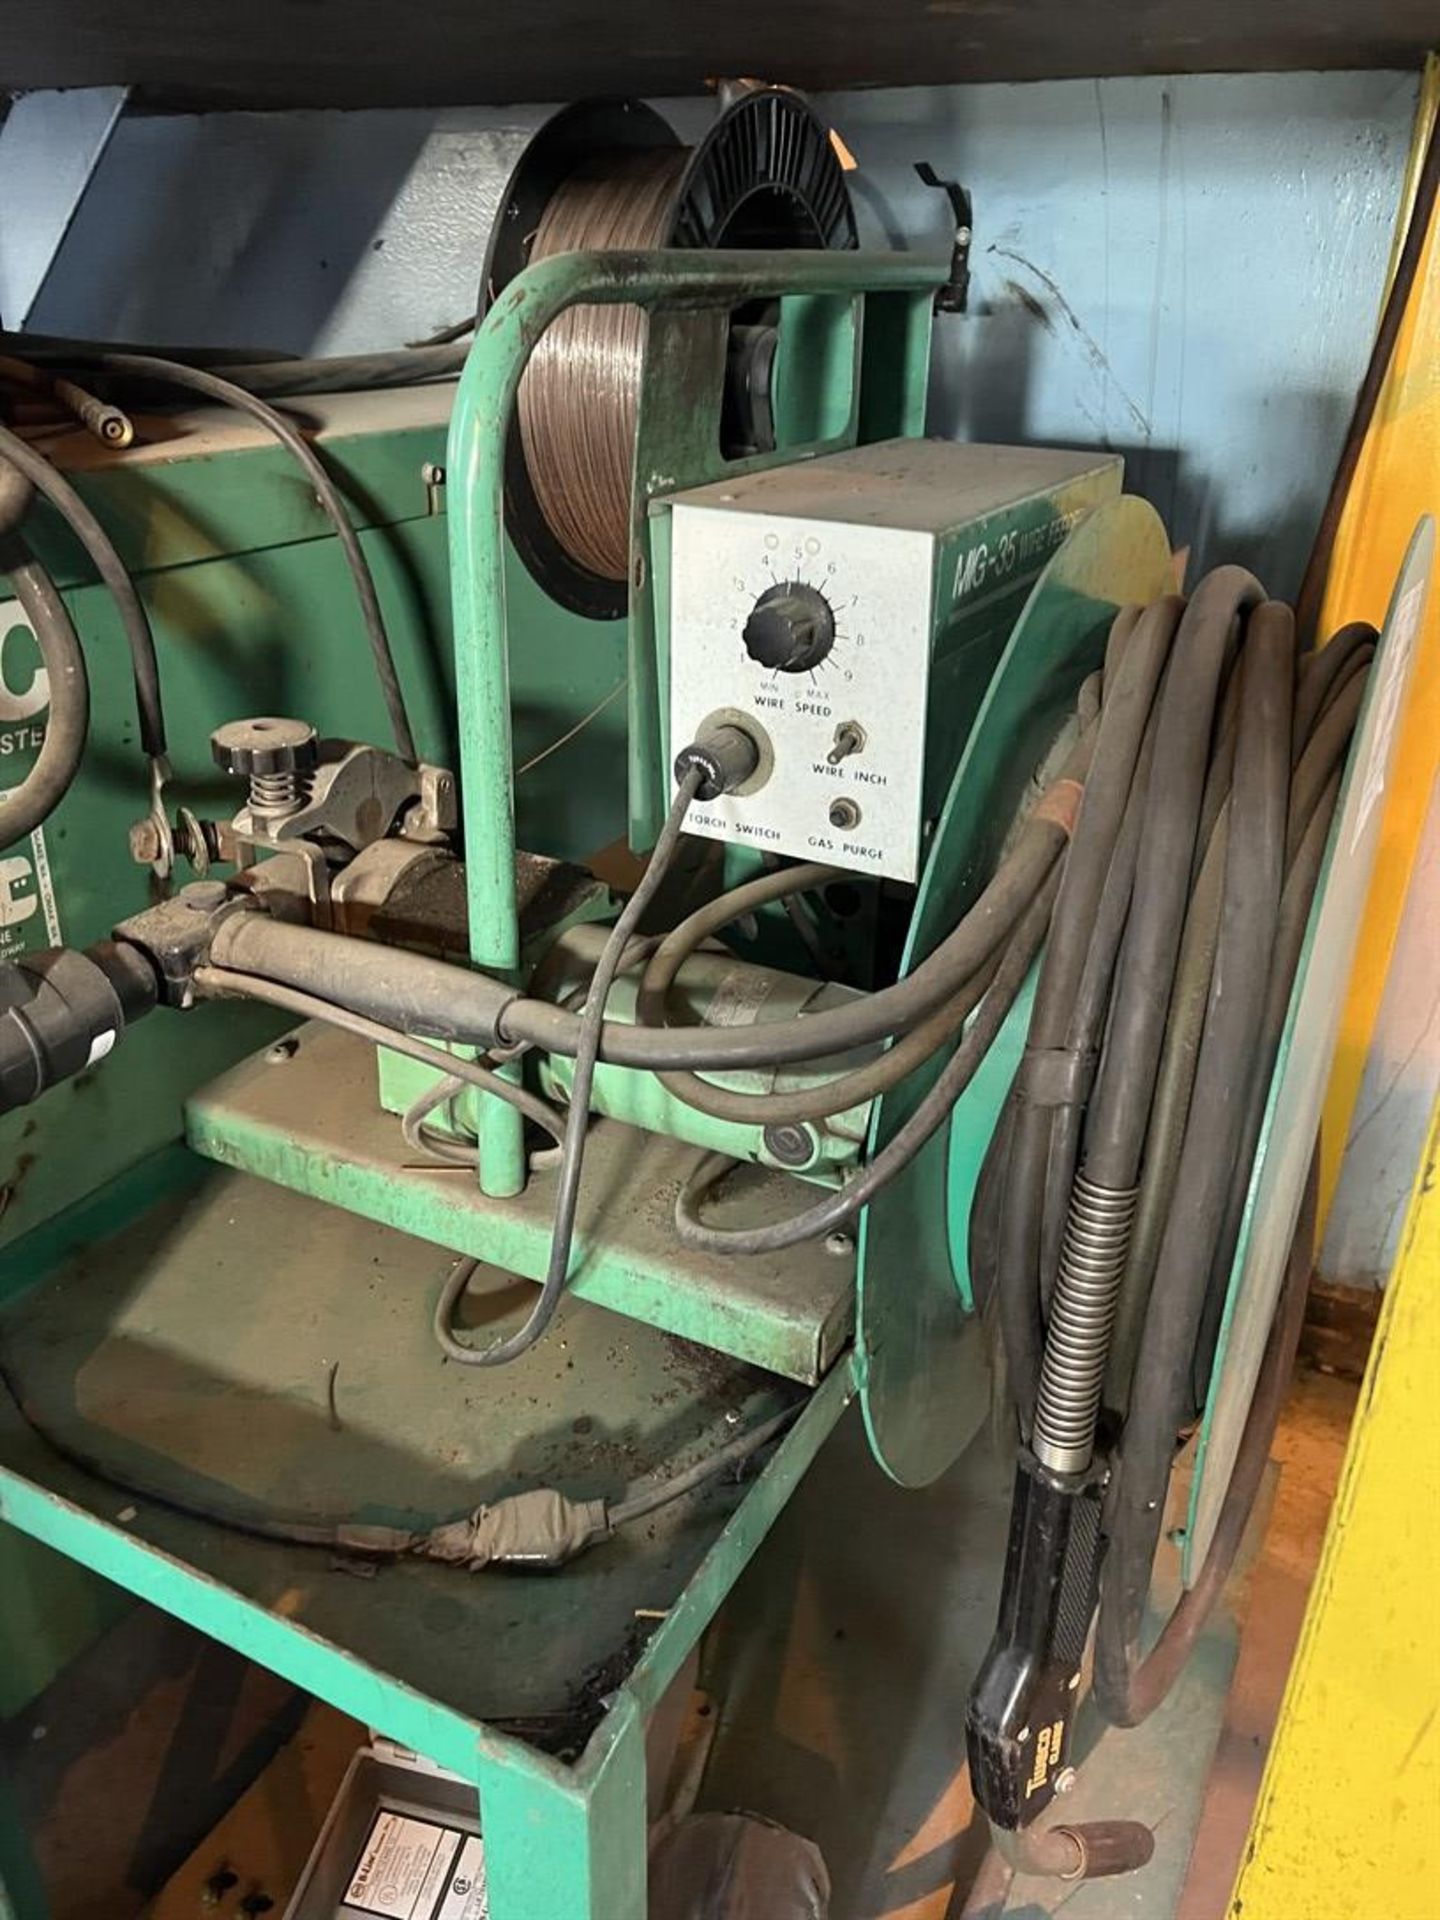 L-TEC 650CV/CC MIG Welder, s/n F89C-05759, w/ MIG-35 Wire Feeder - Image 4 of 5